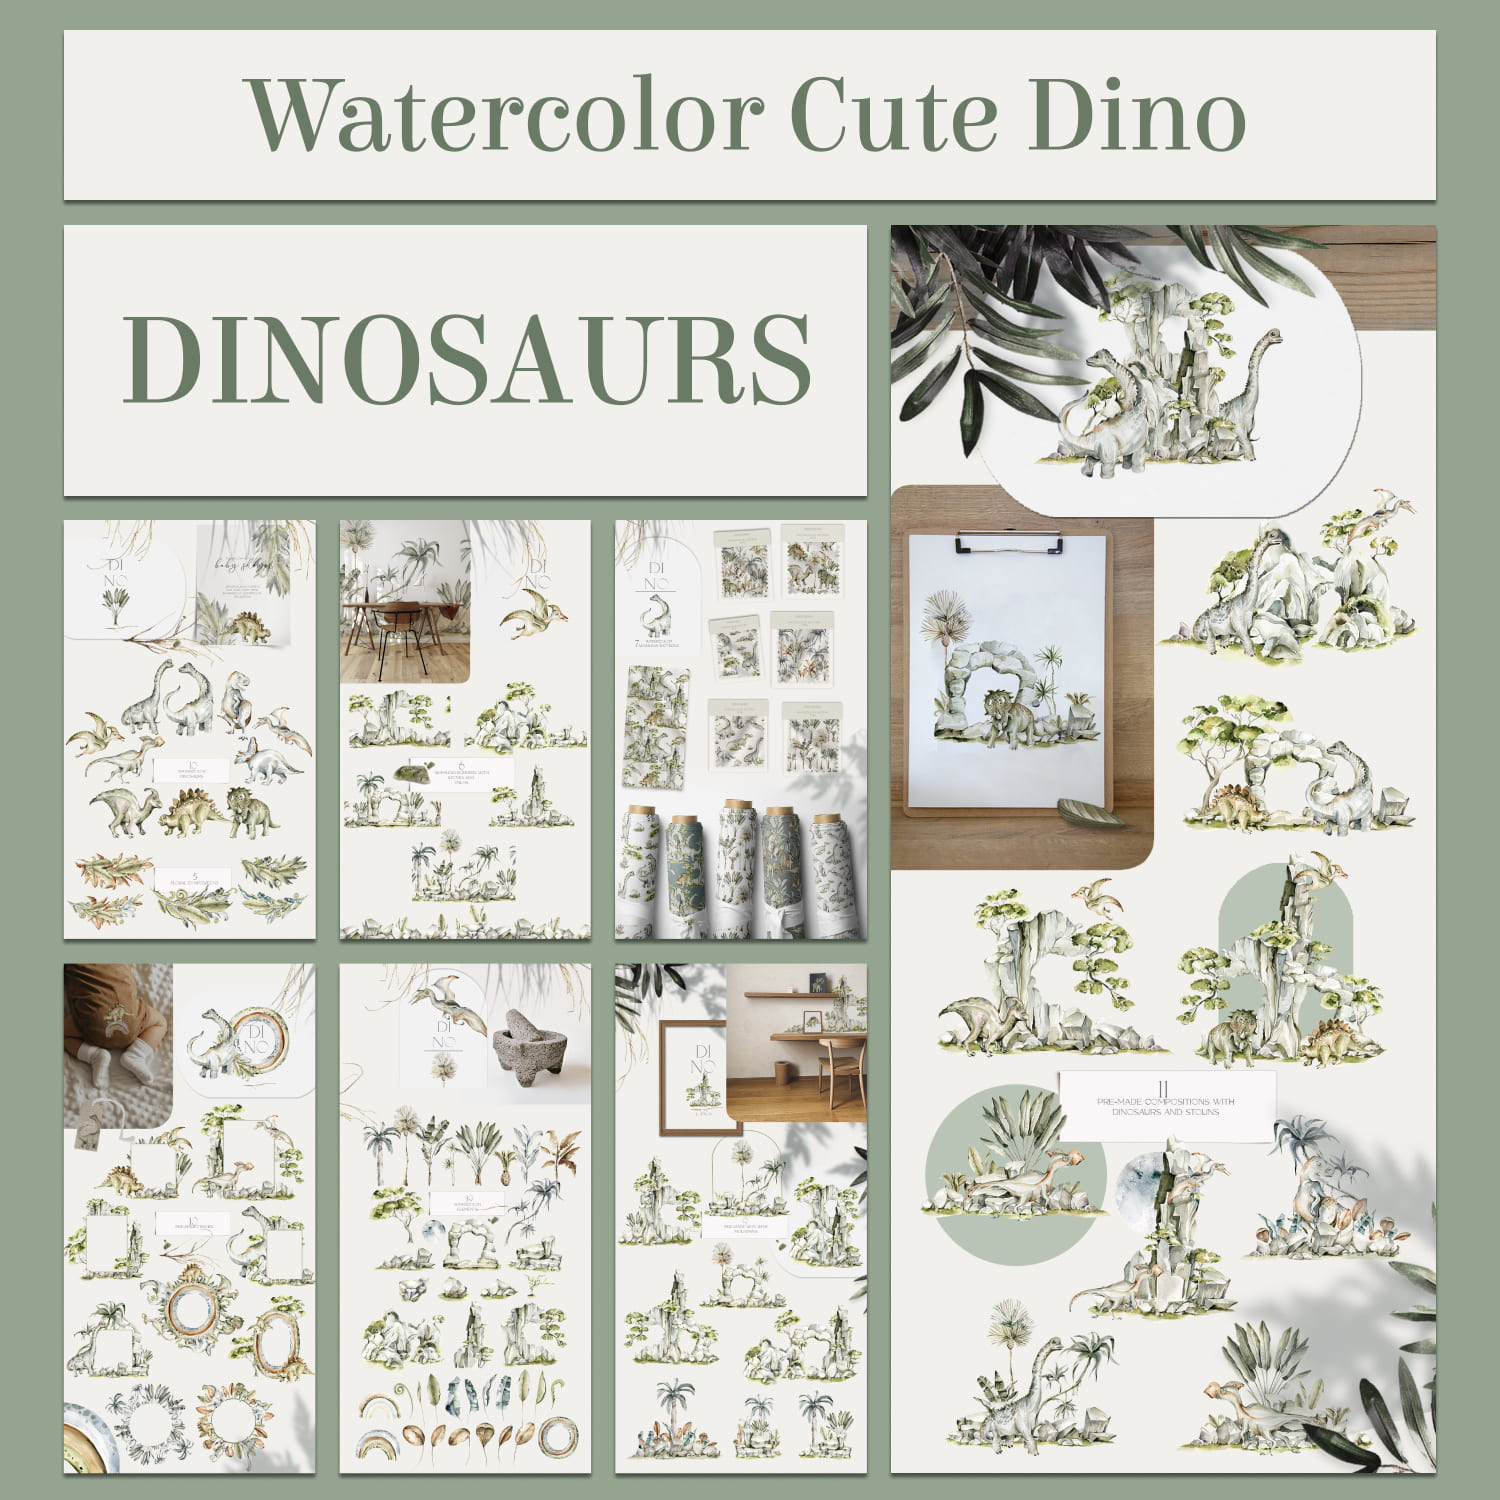 Dinosaurs. Watercolor Cute Dino Collection cover image.